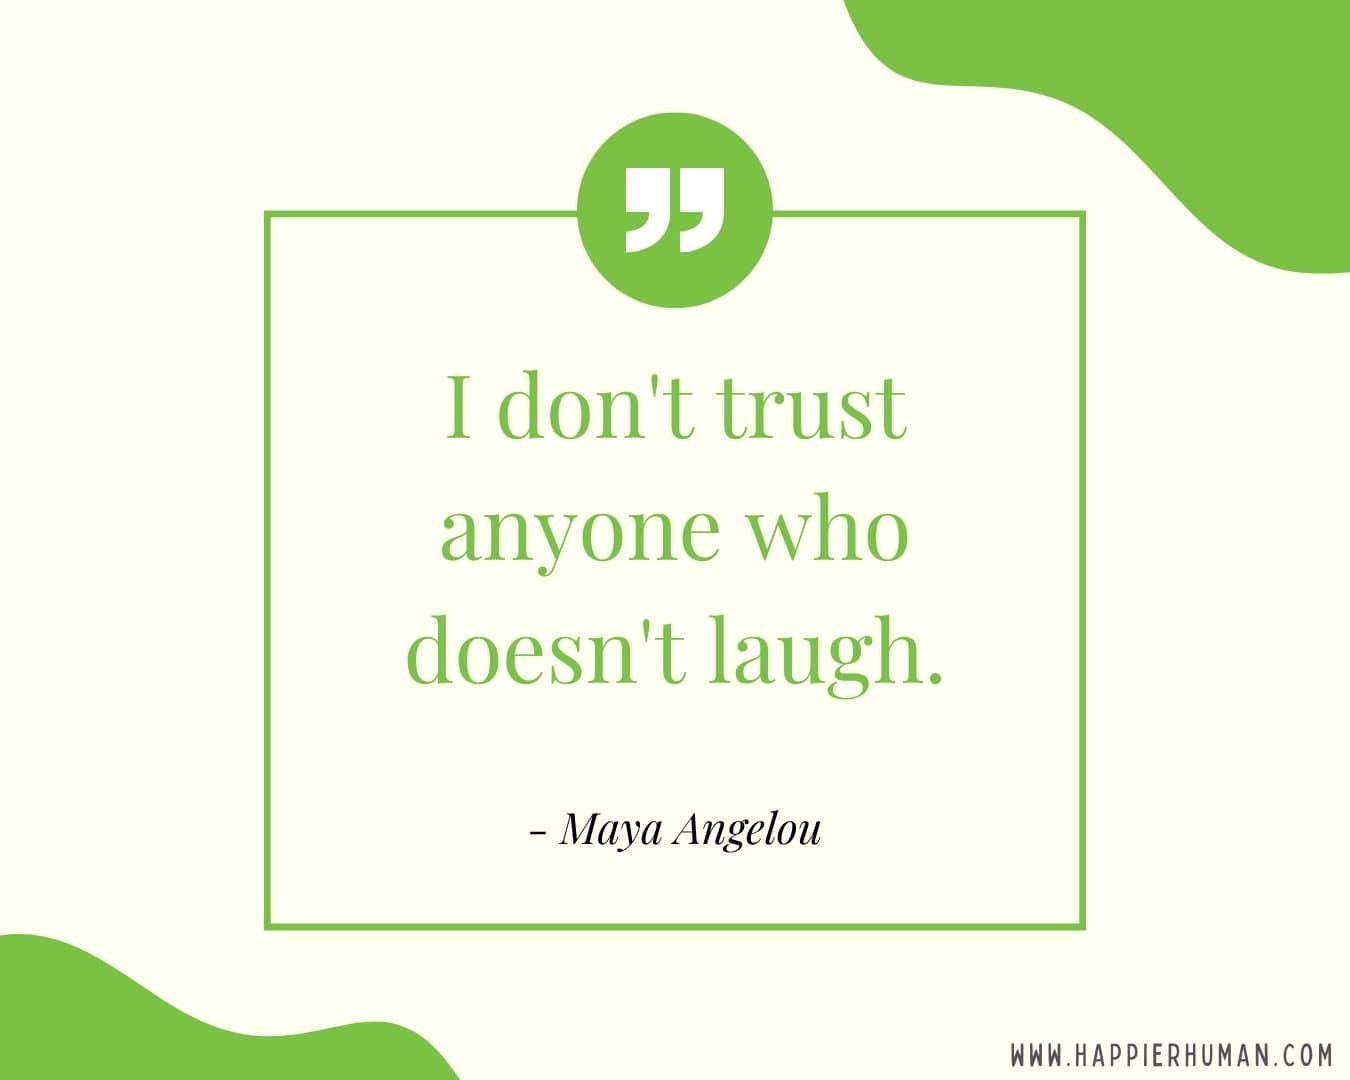 Broken Trust Quotes - “I don't trust anyone who doesn't laugh.” - Maya Angelou